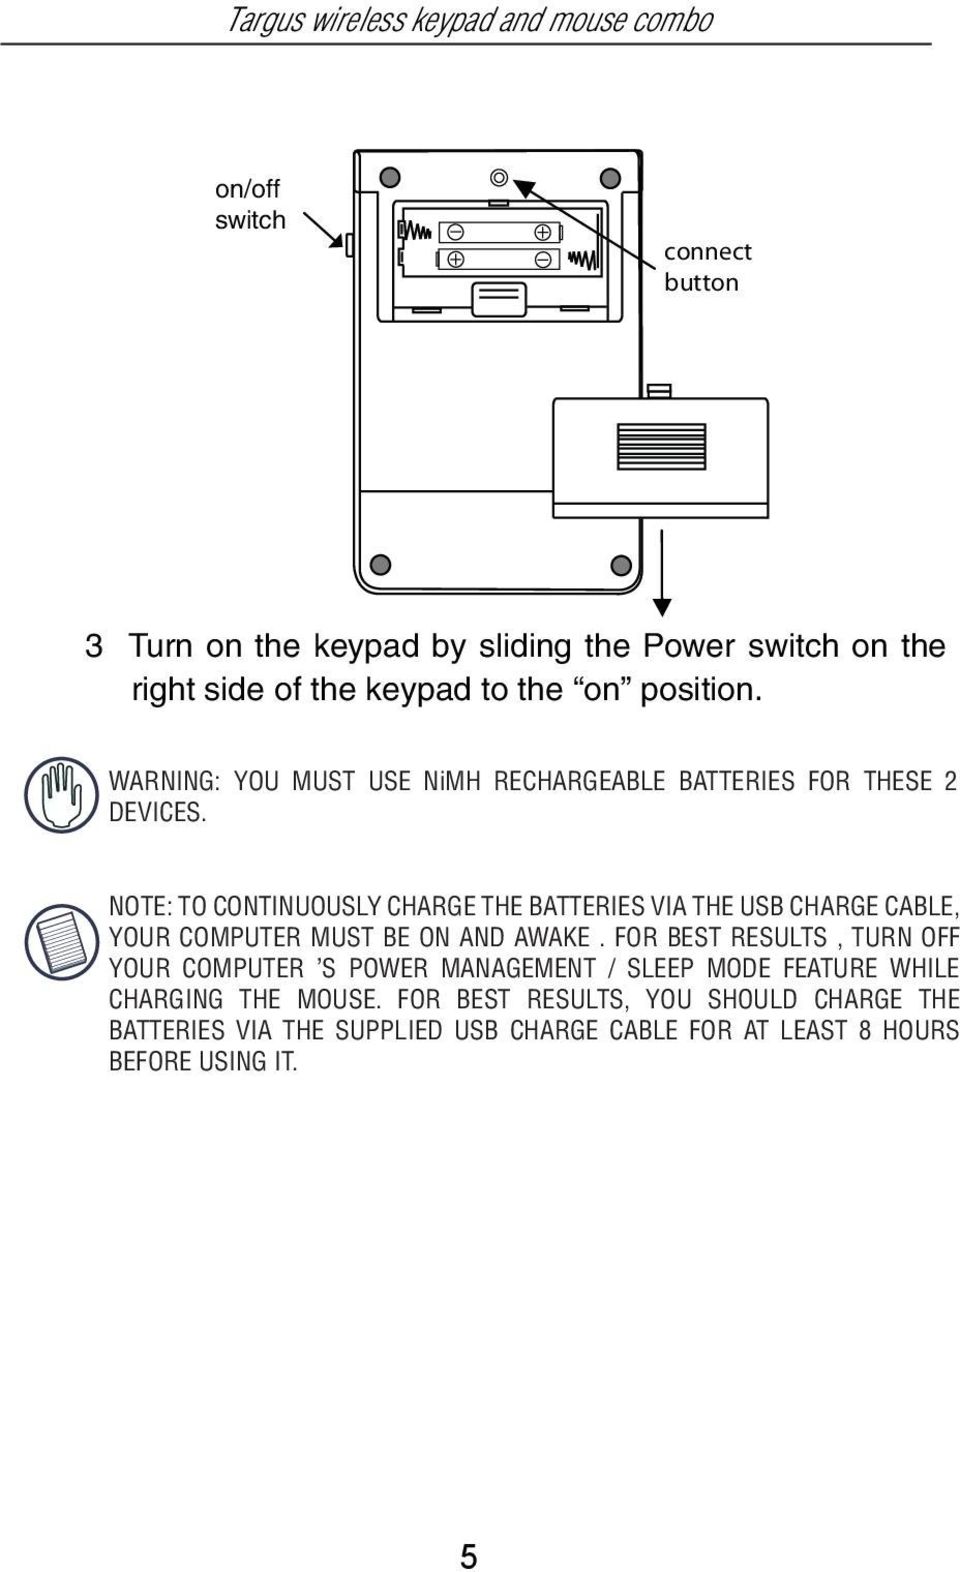 NOTE: TO CONTINUOUSLY CHARGE THE BATTERIES VIA THE USB CHARGE CABLE, YOUR COMPUTER MUST BE ON AND AWAKE.